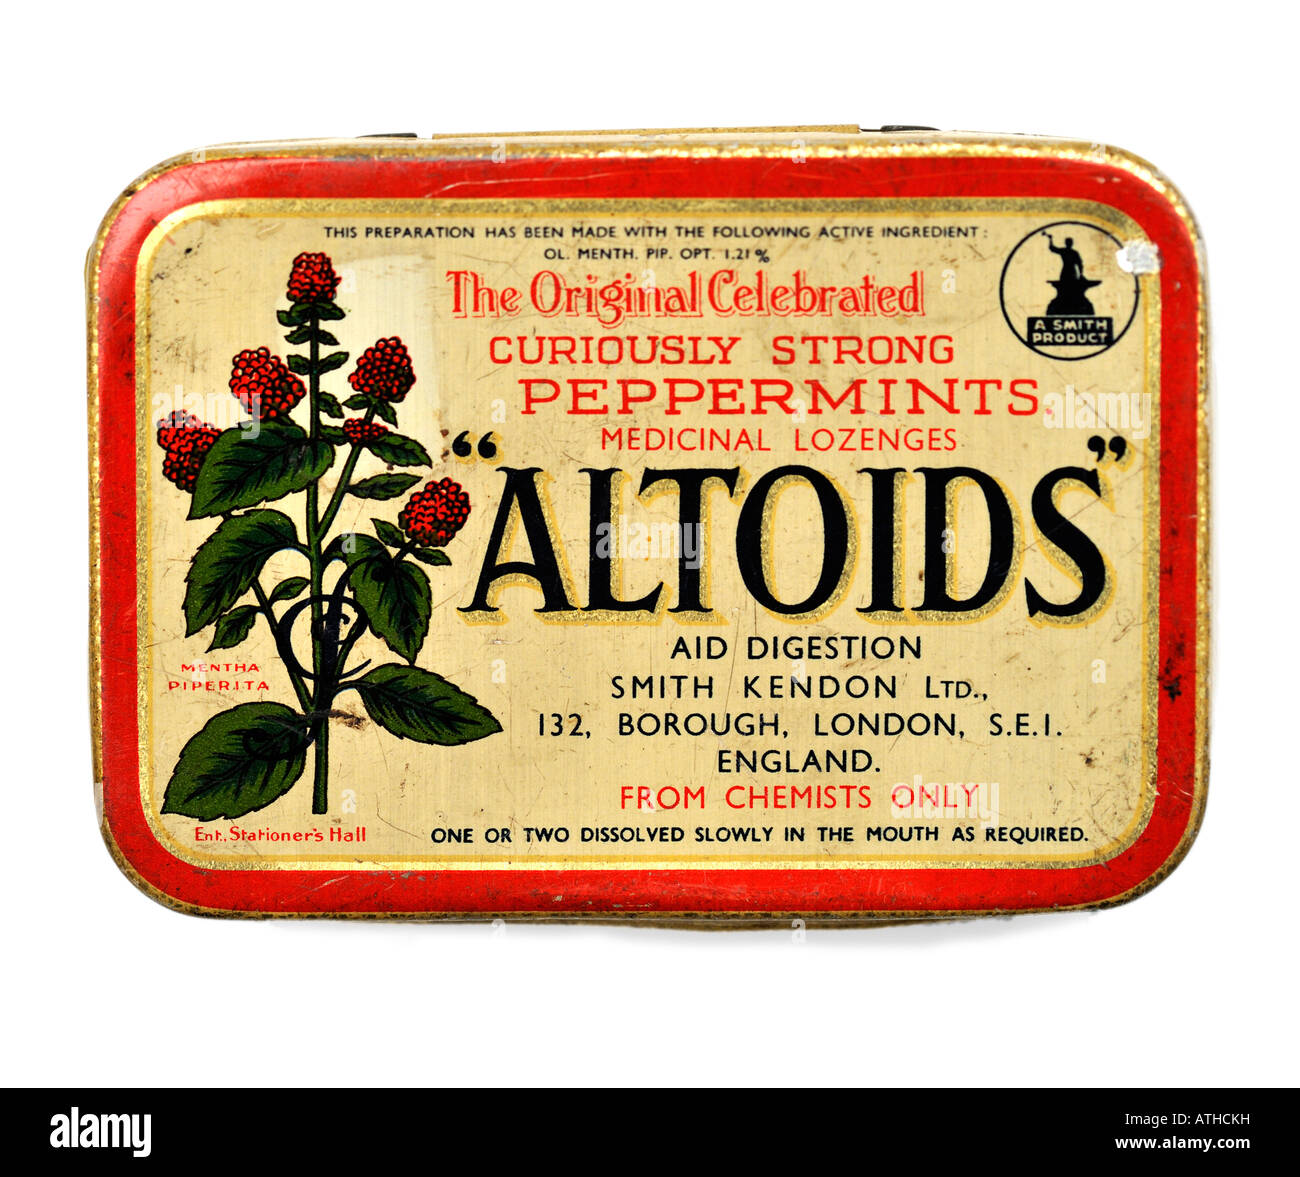 https://c8.alamy.com/comp/ATHCKH/old-vintage-tin-box-of-altoids-smith-kendon-curiously-strong-peppermints-ATHCKH.jpg